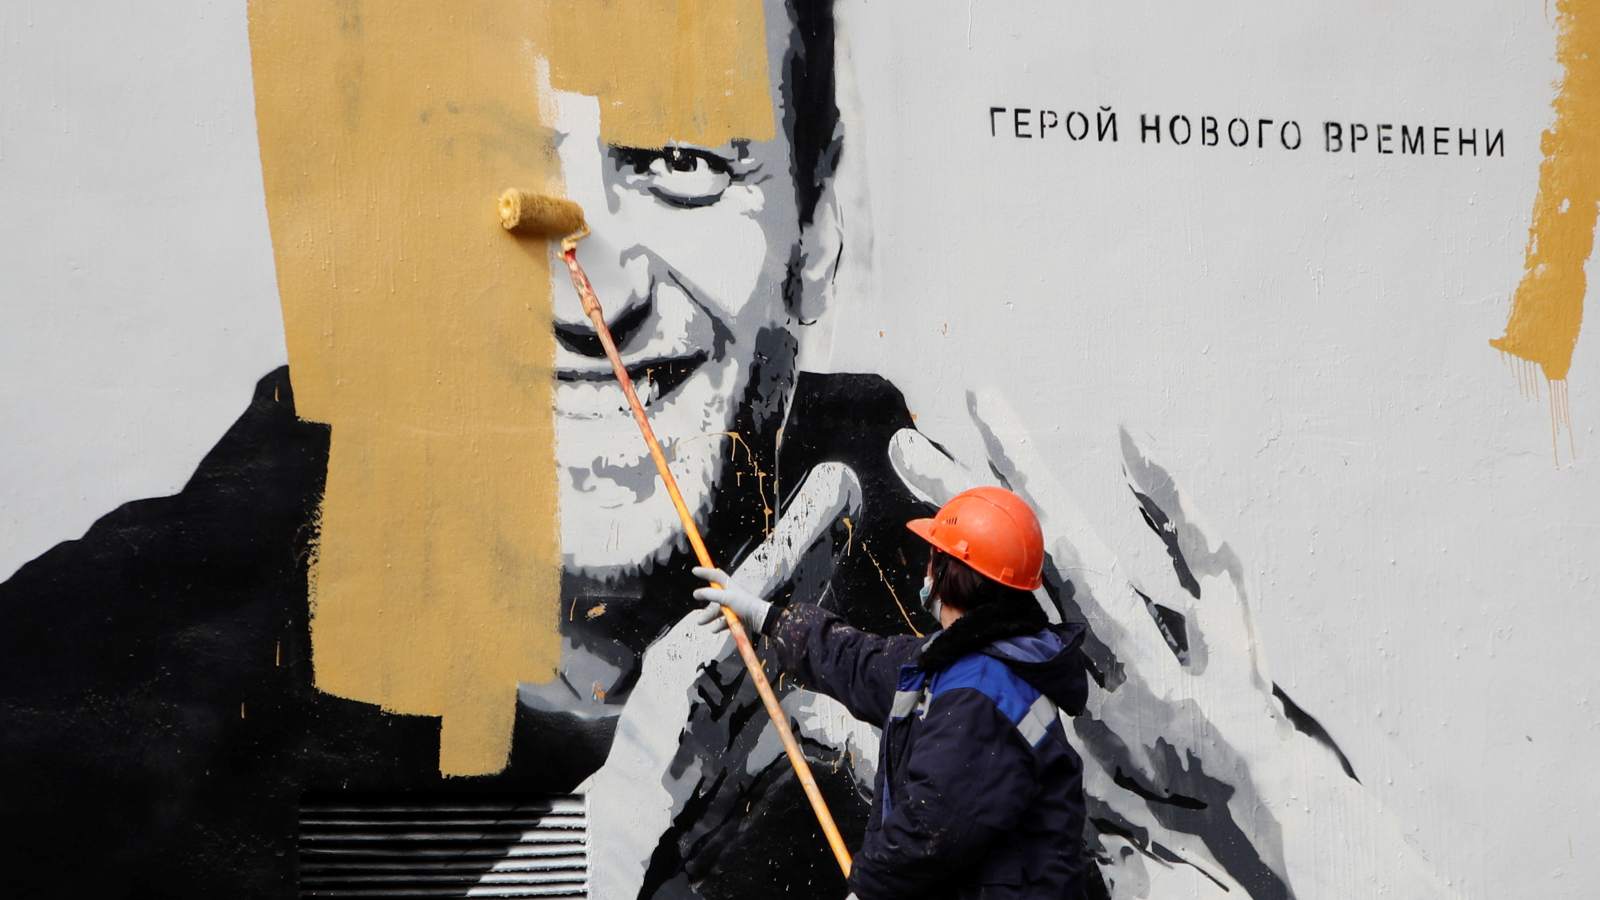 Photo: A worker paints over a graffiti depicting jailed Russian opposition politician Alexei Navalny in Saint Petersburg, Russia April 28, 2021. The graffiti reads: "The hero of the new age". Credit: REUTERS/Anton Vaganov